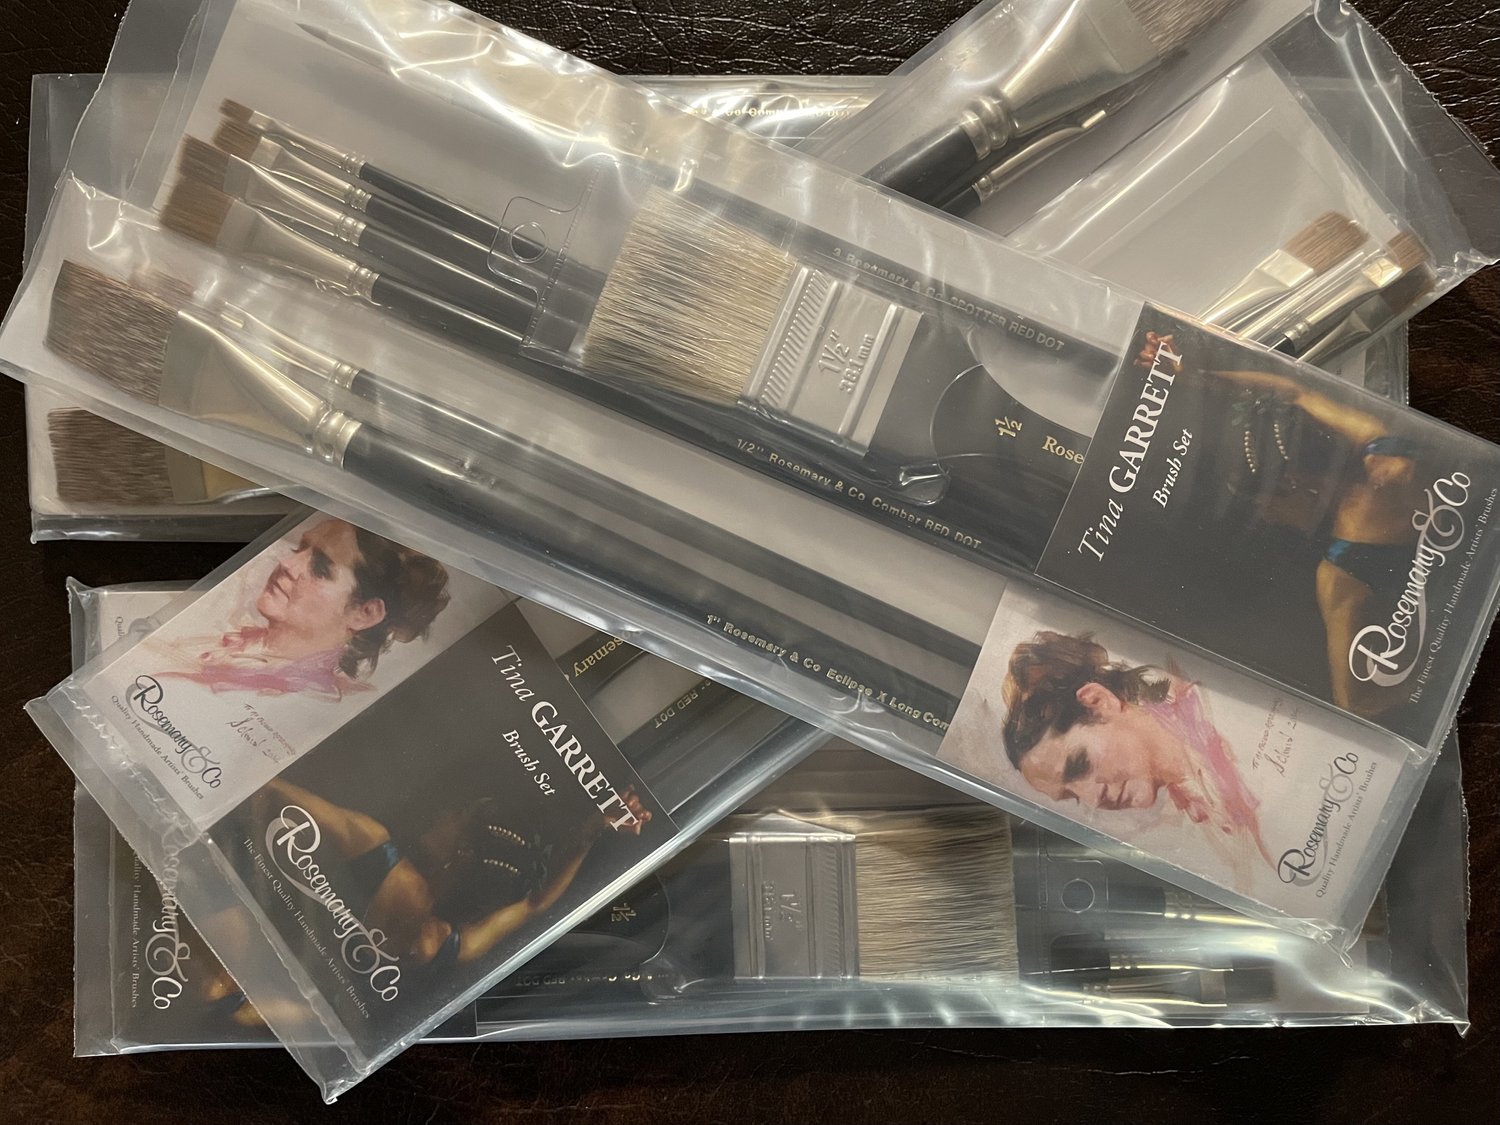 Tina's Rosemary Brush Set Delivered to the Workshop